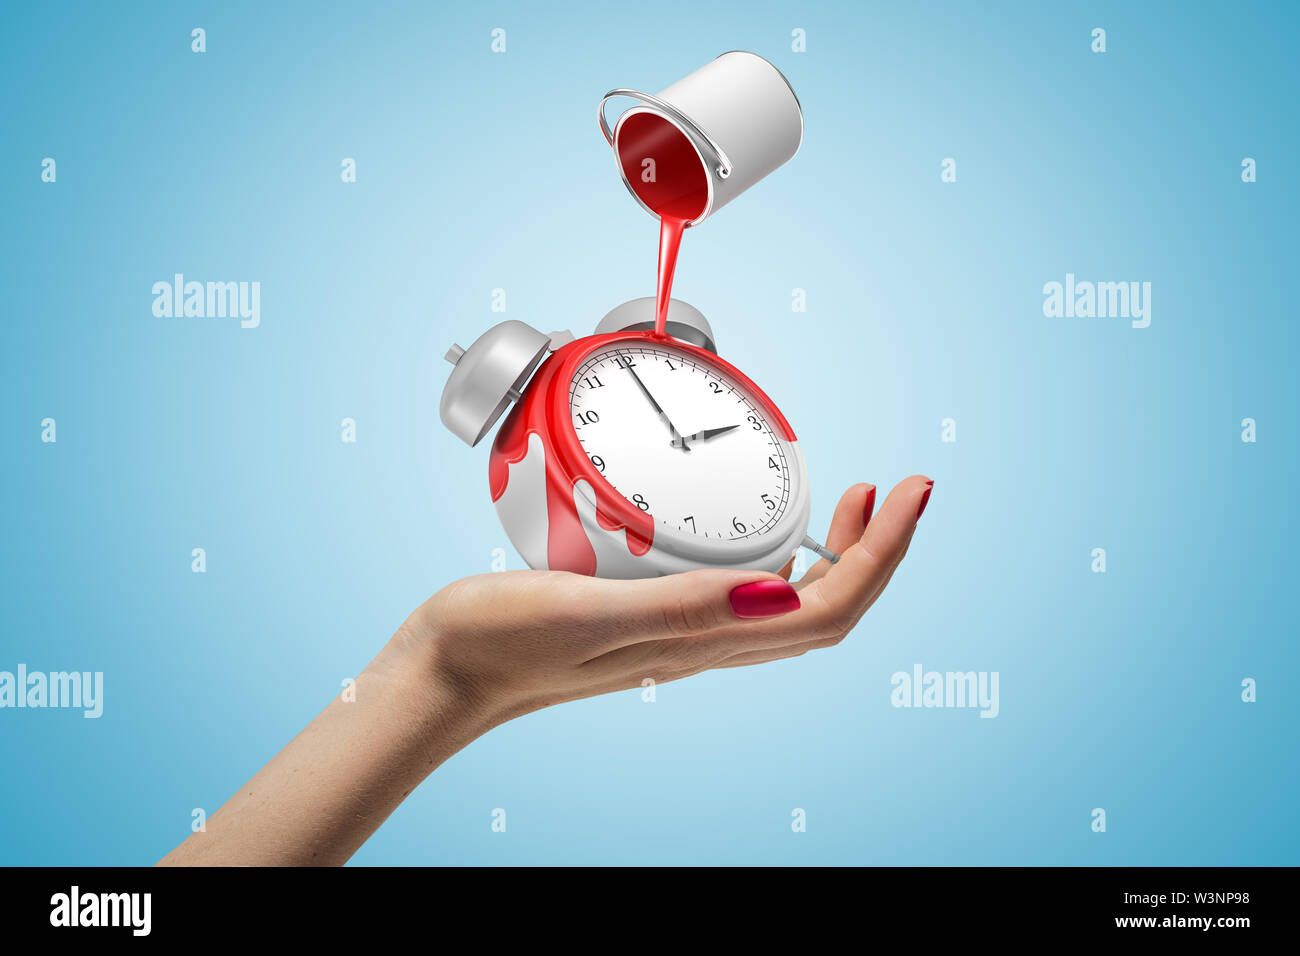 Female hand holding alarm clock with red paint bucket turned upside down above it on blue background Stock Photo